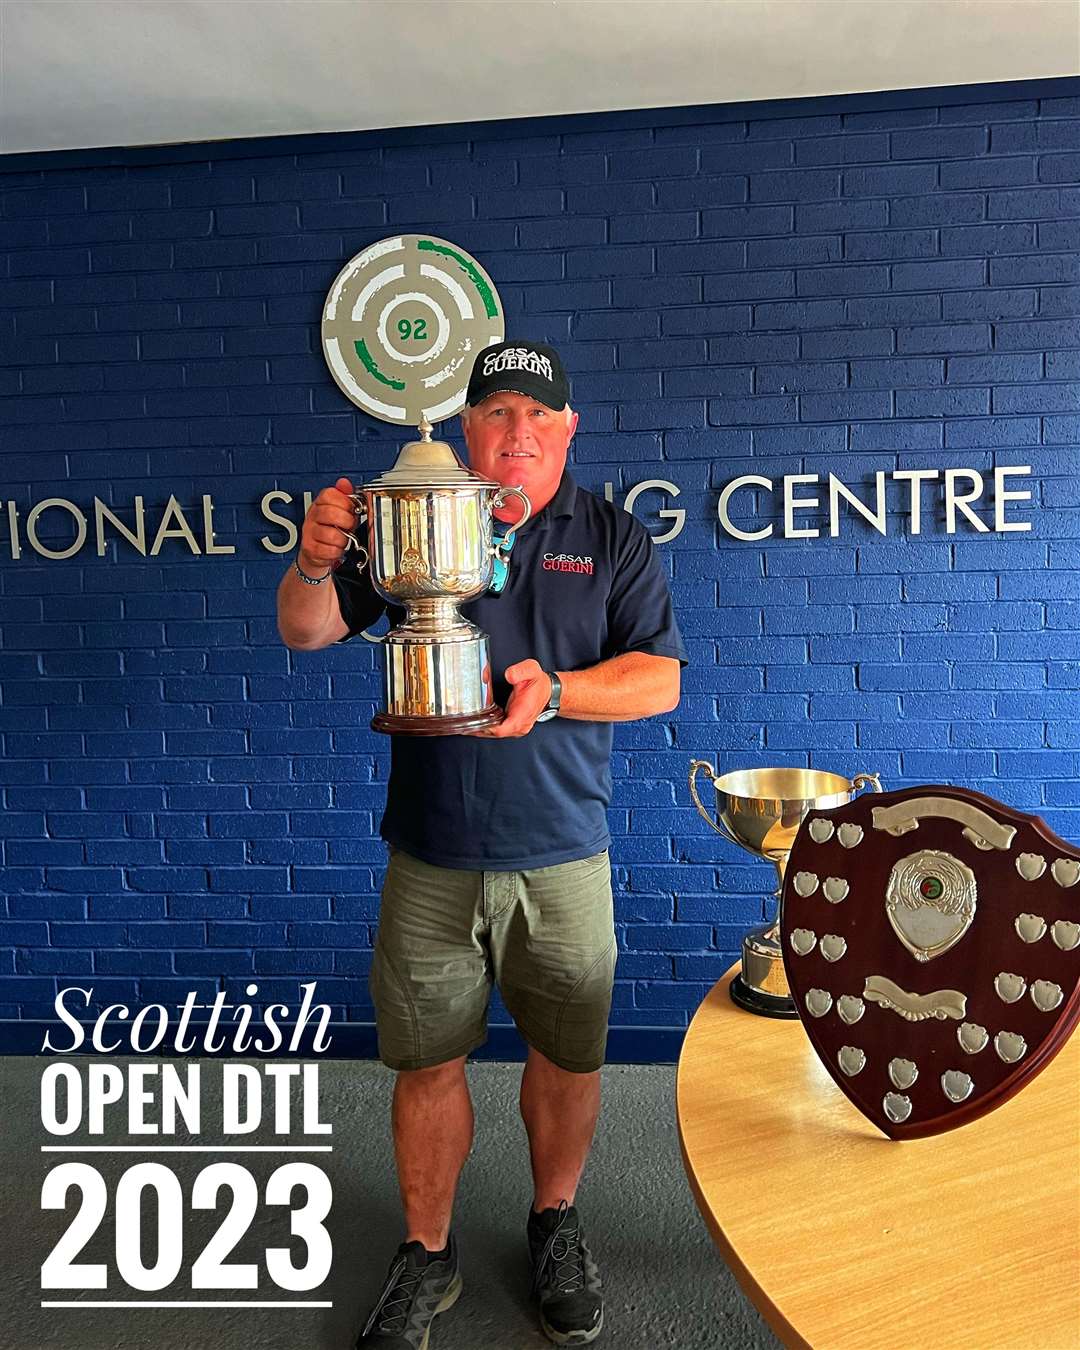 Marcus Munro won the High Gun at the Scottish Open DTL Championships to become Scottish DTL Open Champion 2023.